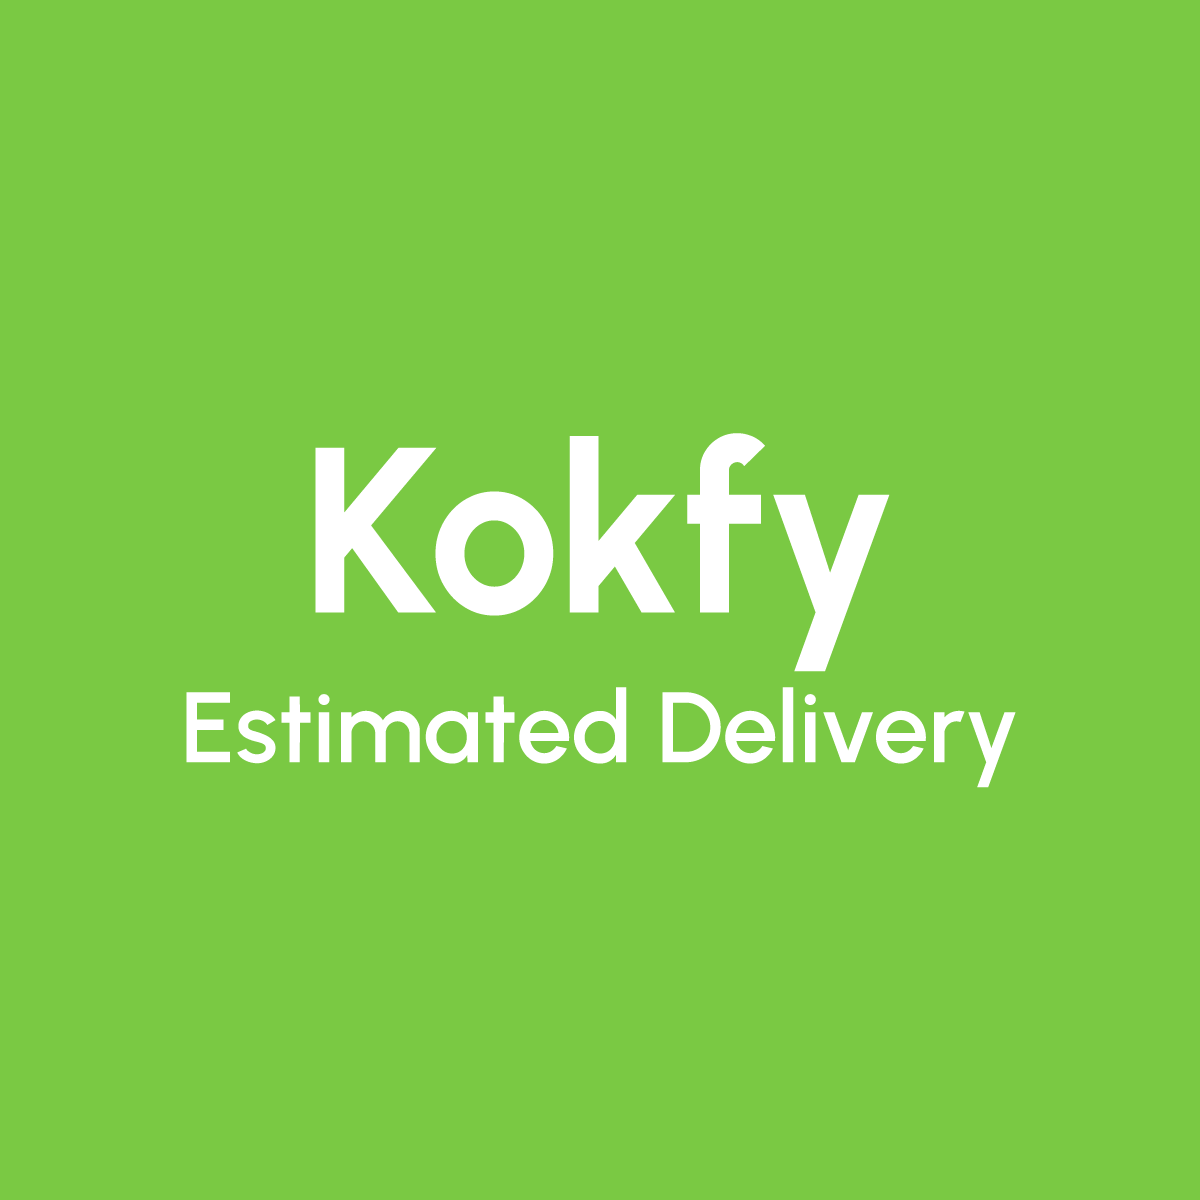 Hire Shopify Experts to integrate Kokfy ‑ Estimated Delivery app into a Shopify store